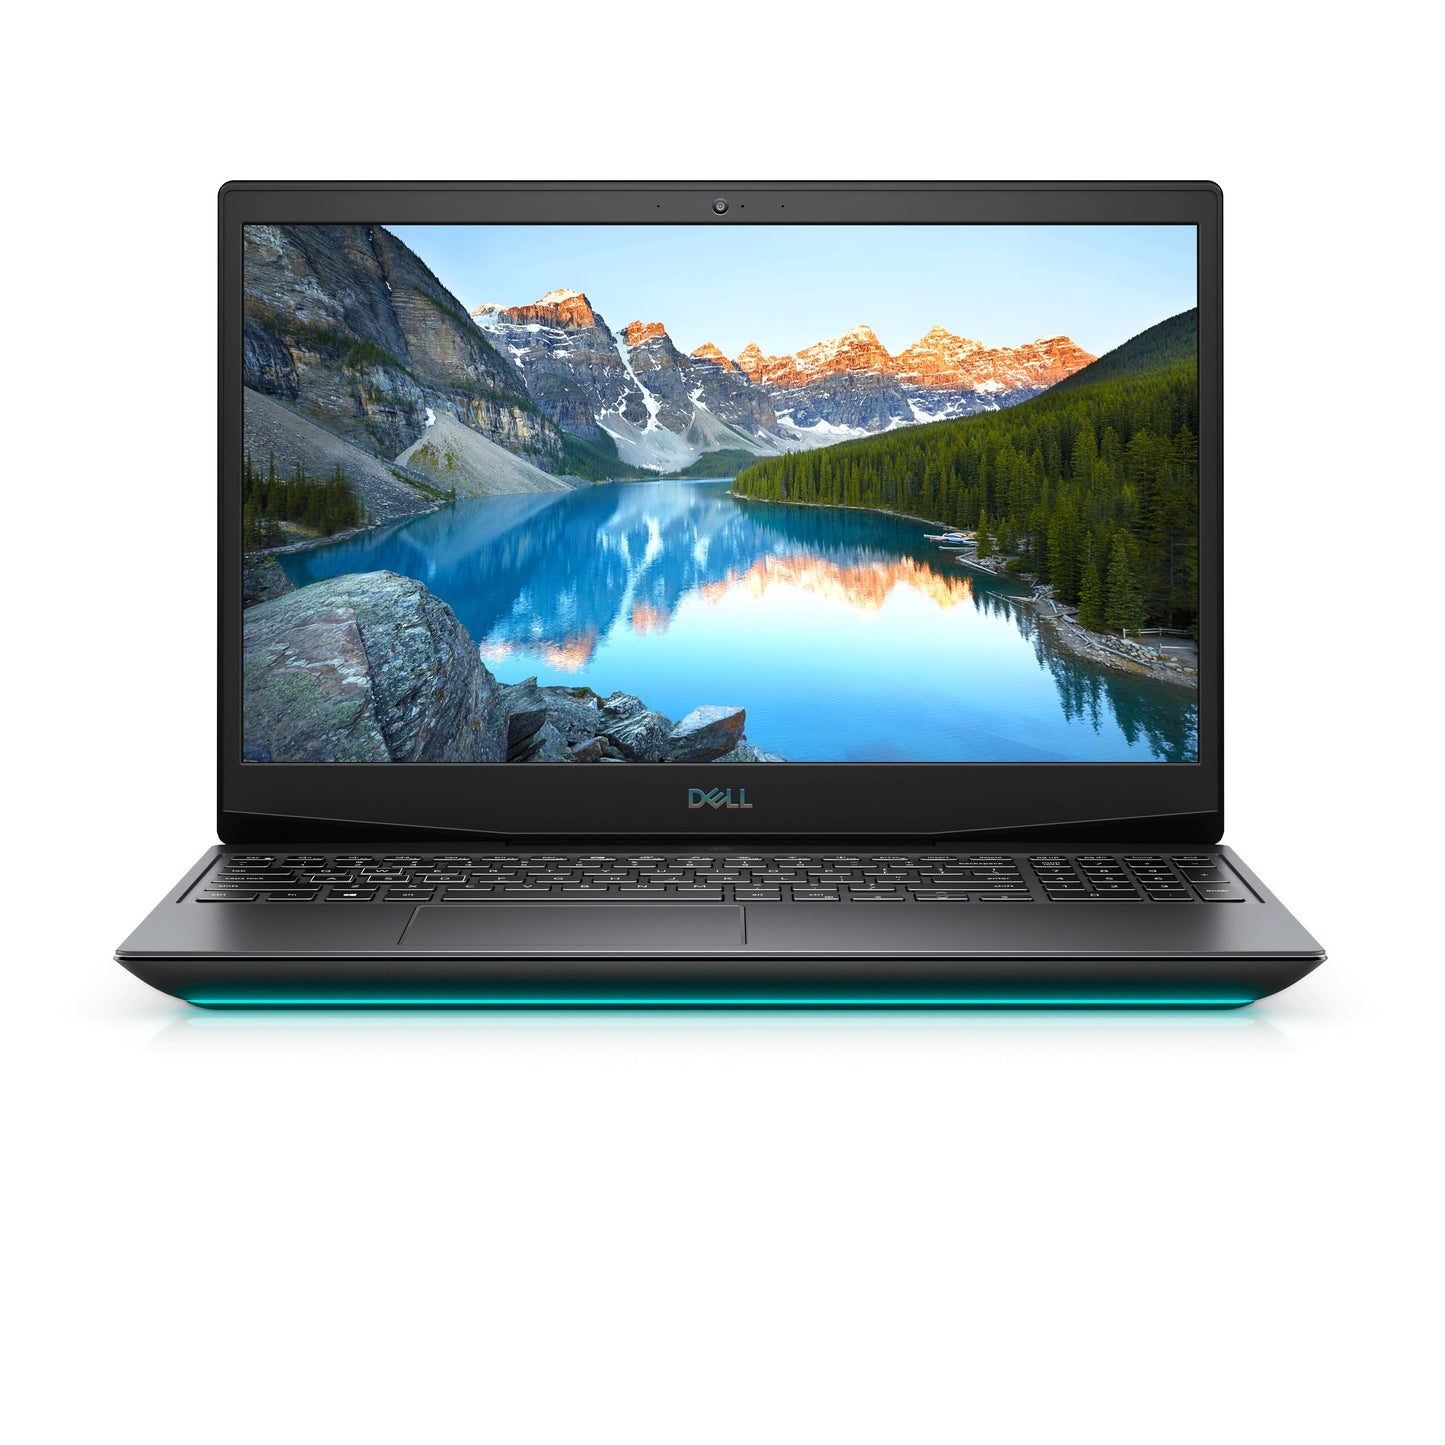 Dell G5 5500 i7-10750H RTX 2060 Gaming Laptop Offers (Brand New)